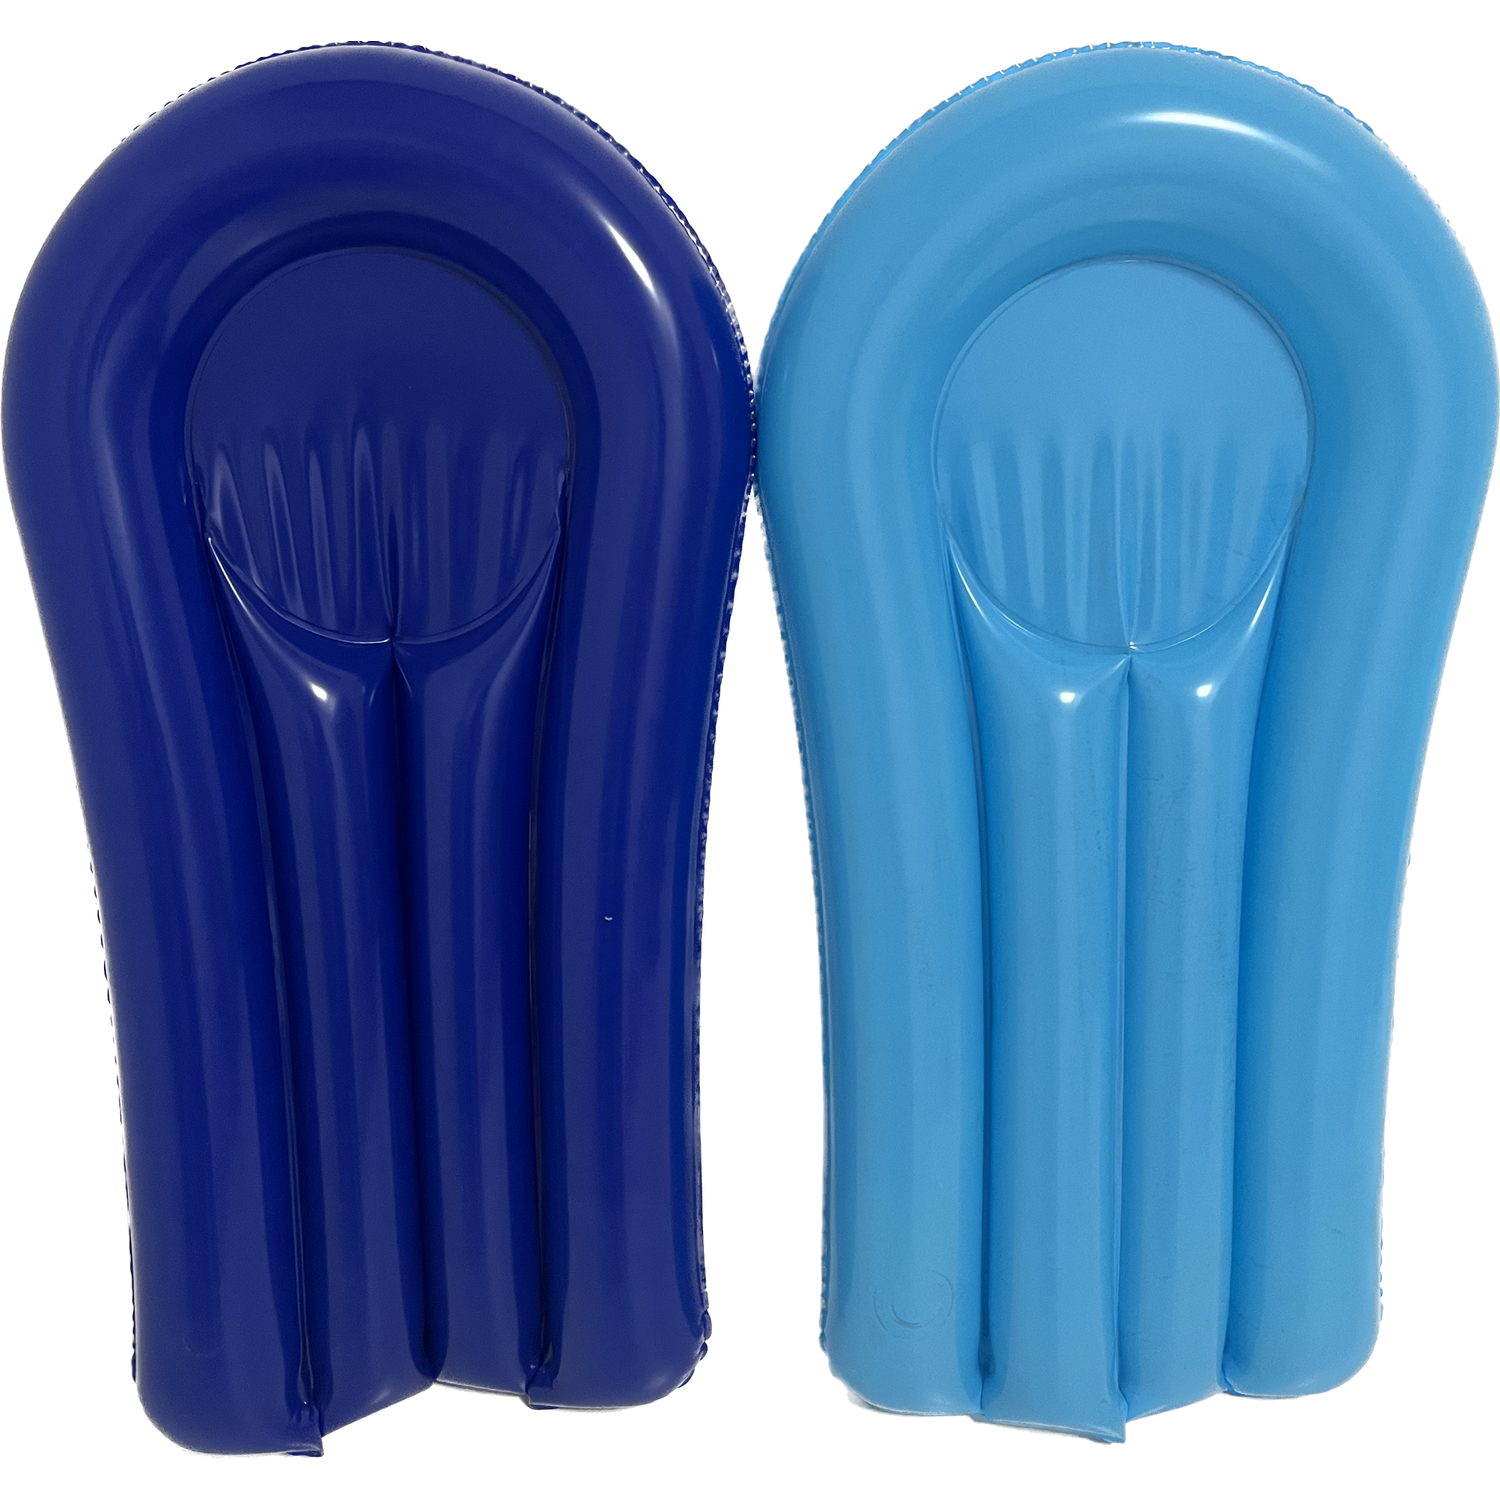 Water Slider and Surfboards - Blue Image 1